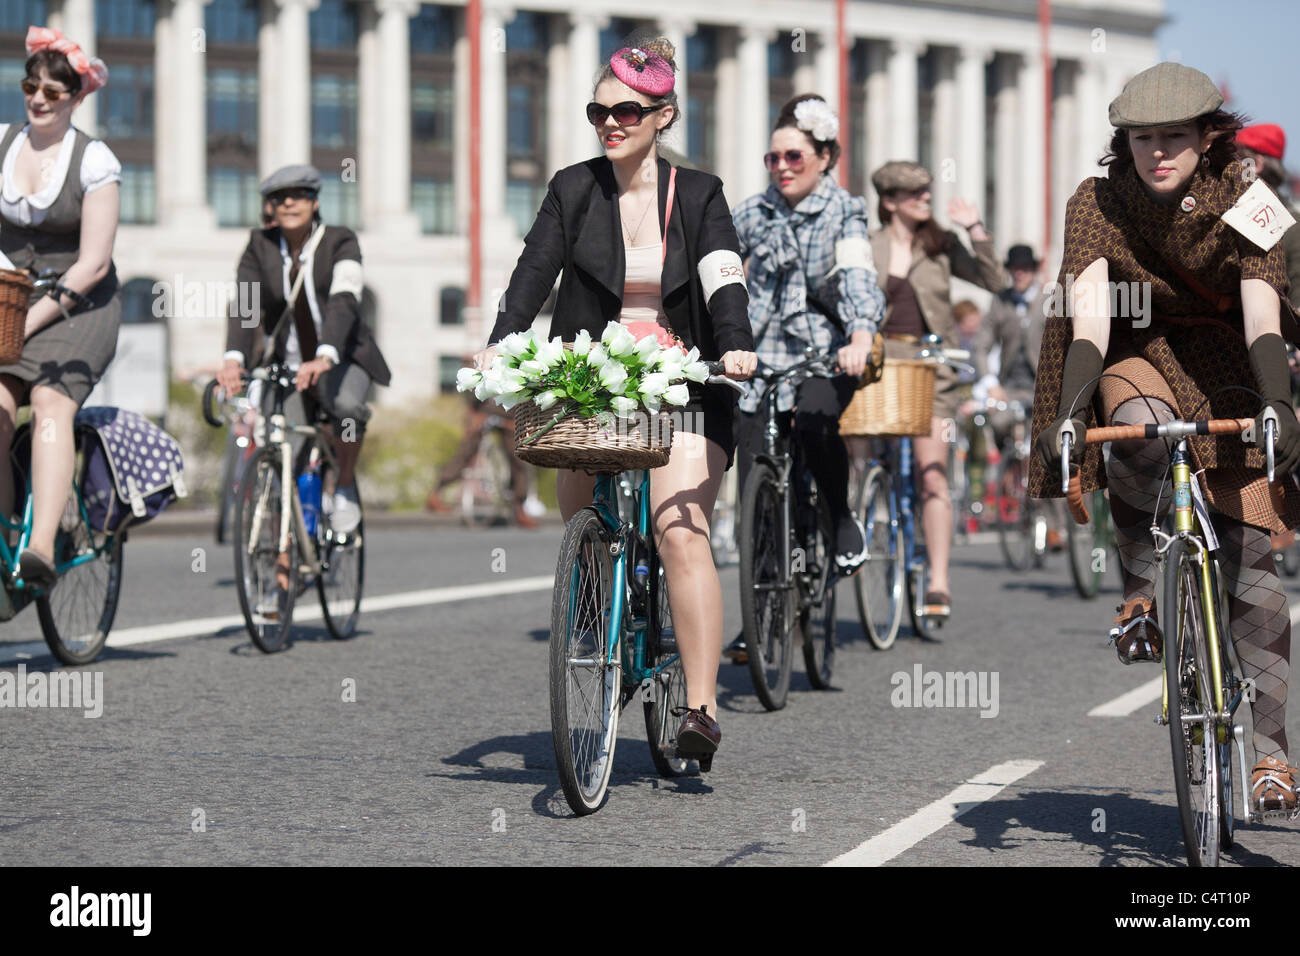 Well-dressed cyclists ride in the London Tweed Run, 2011 Stock Photo